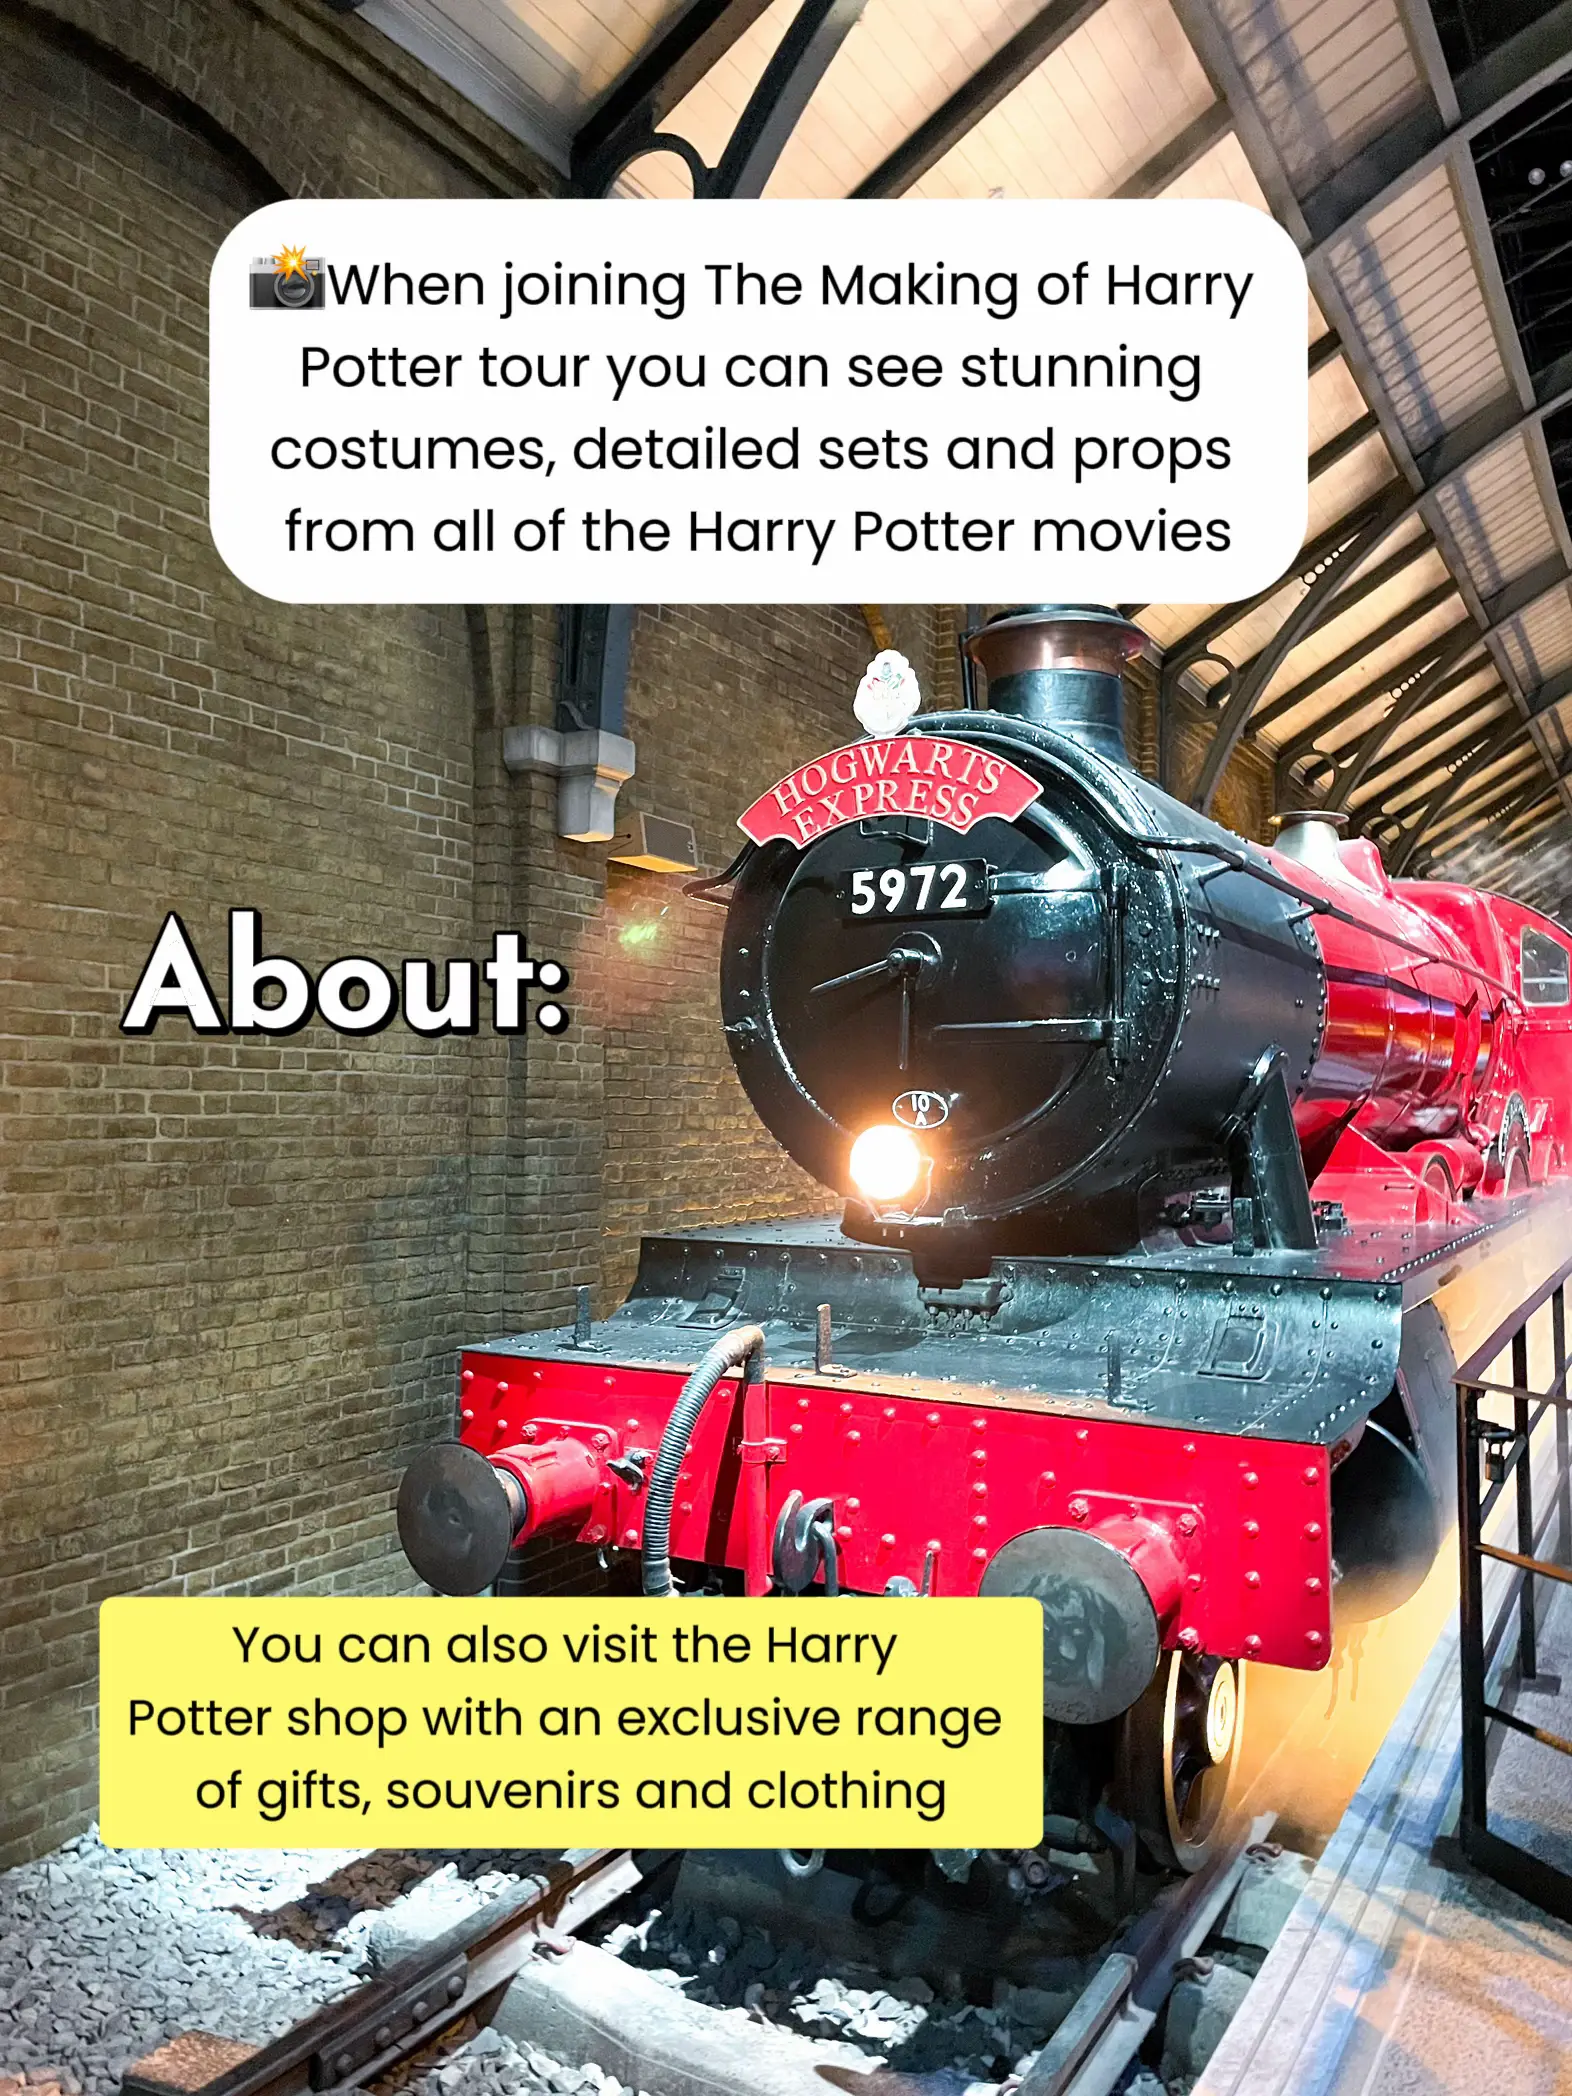 The Harry Potter Shop - All You Need to Know BEFORE You Go (with Photos)